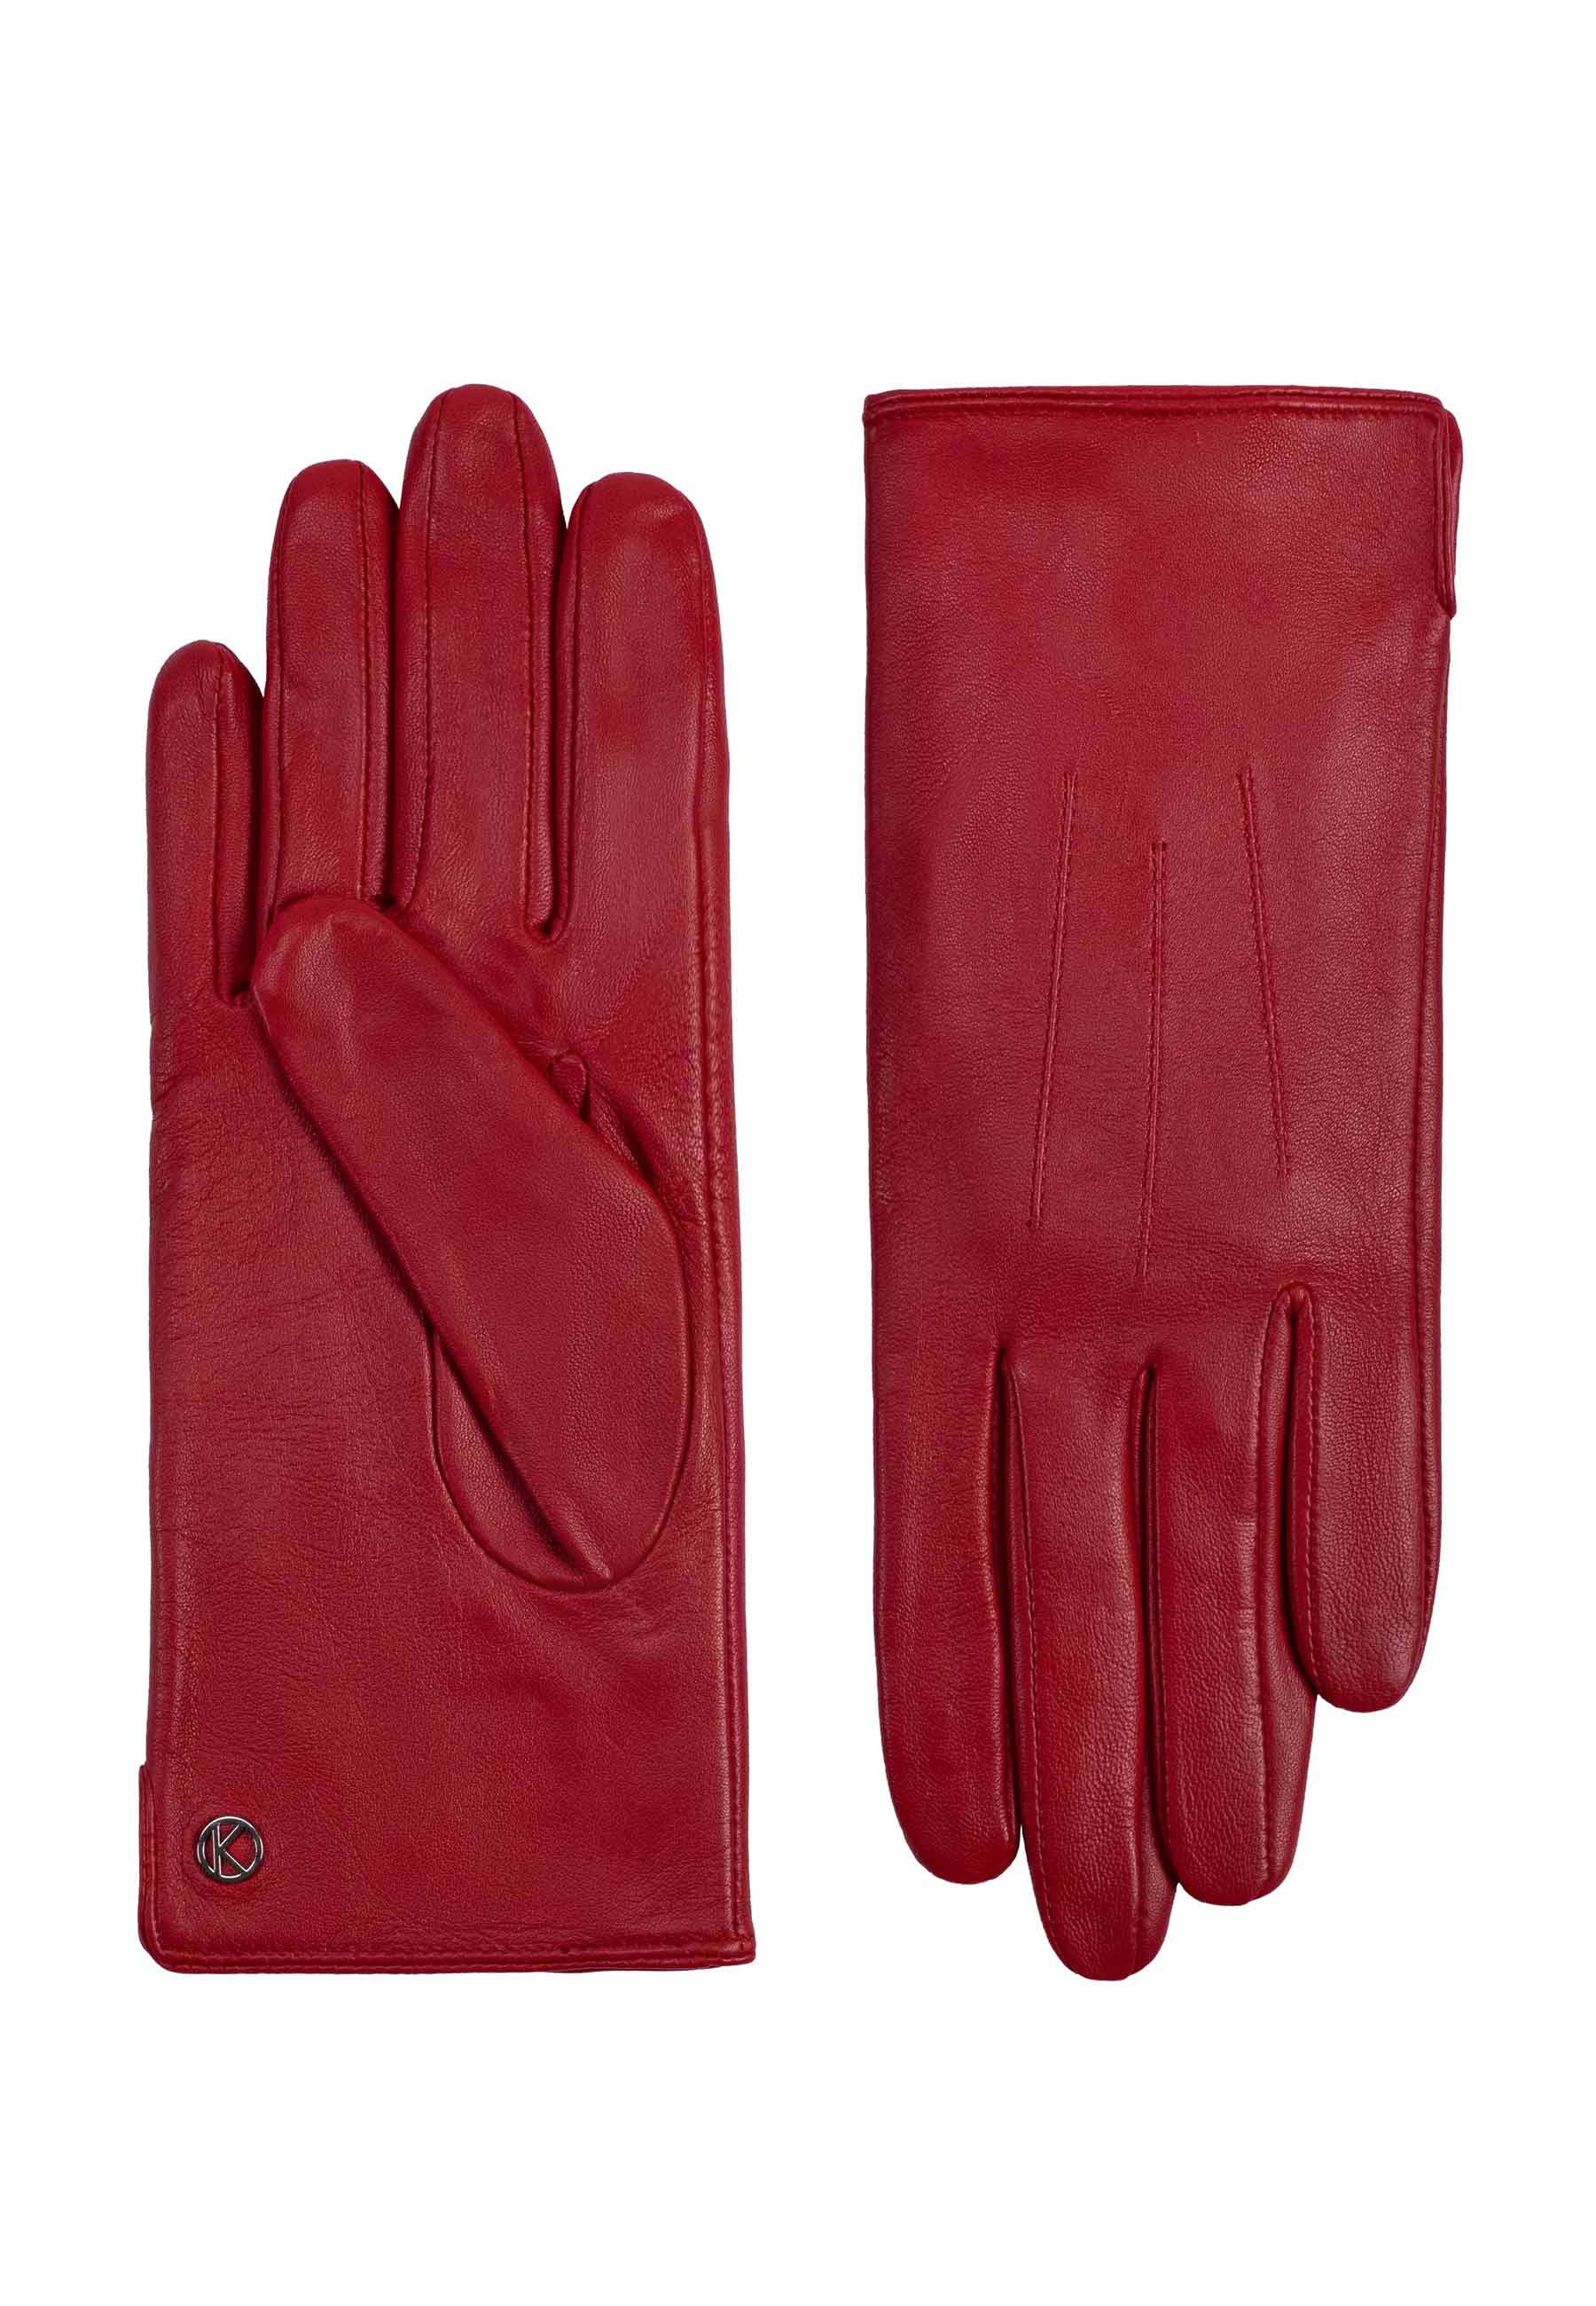 Gloves 'Carla' red